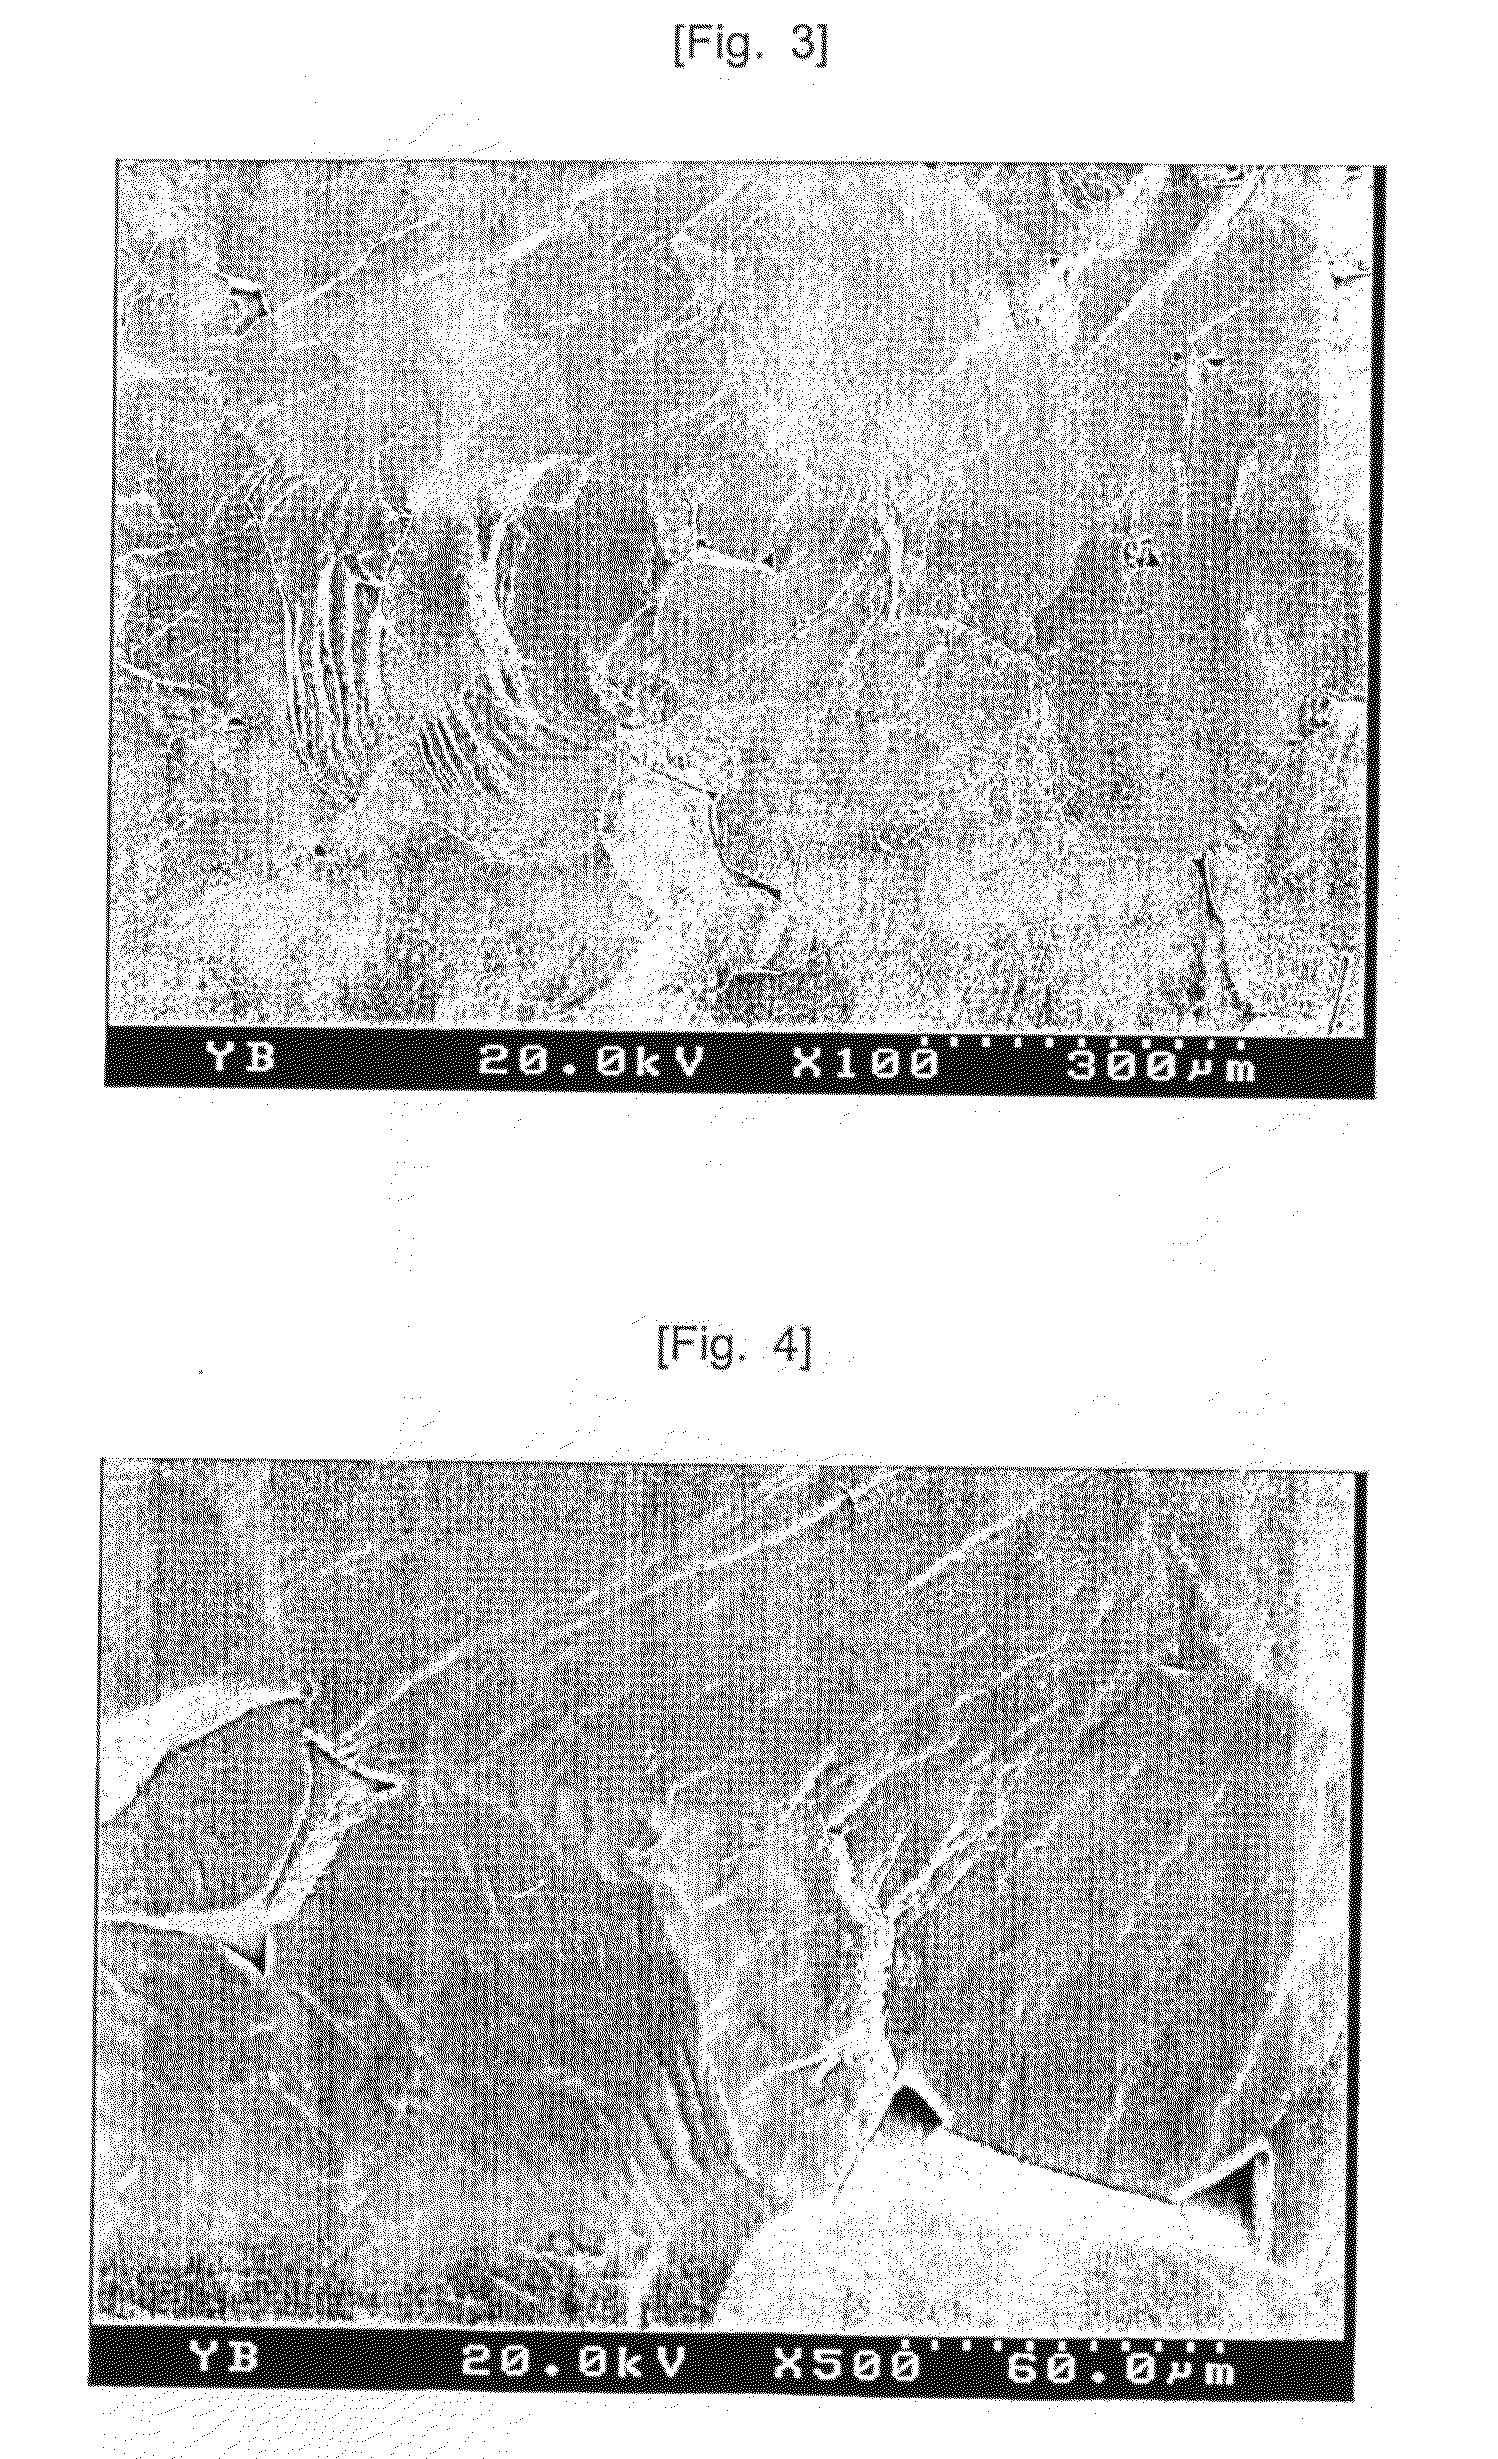 Method for manufacturing transparent polycrystalline aluminum oxynitride